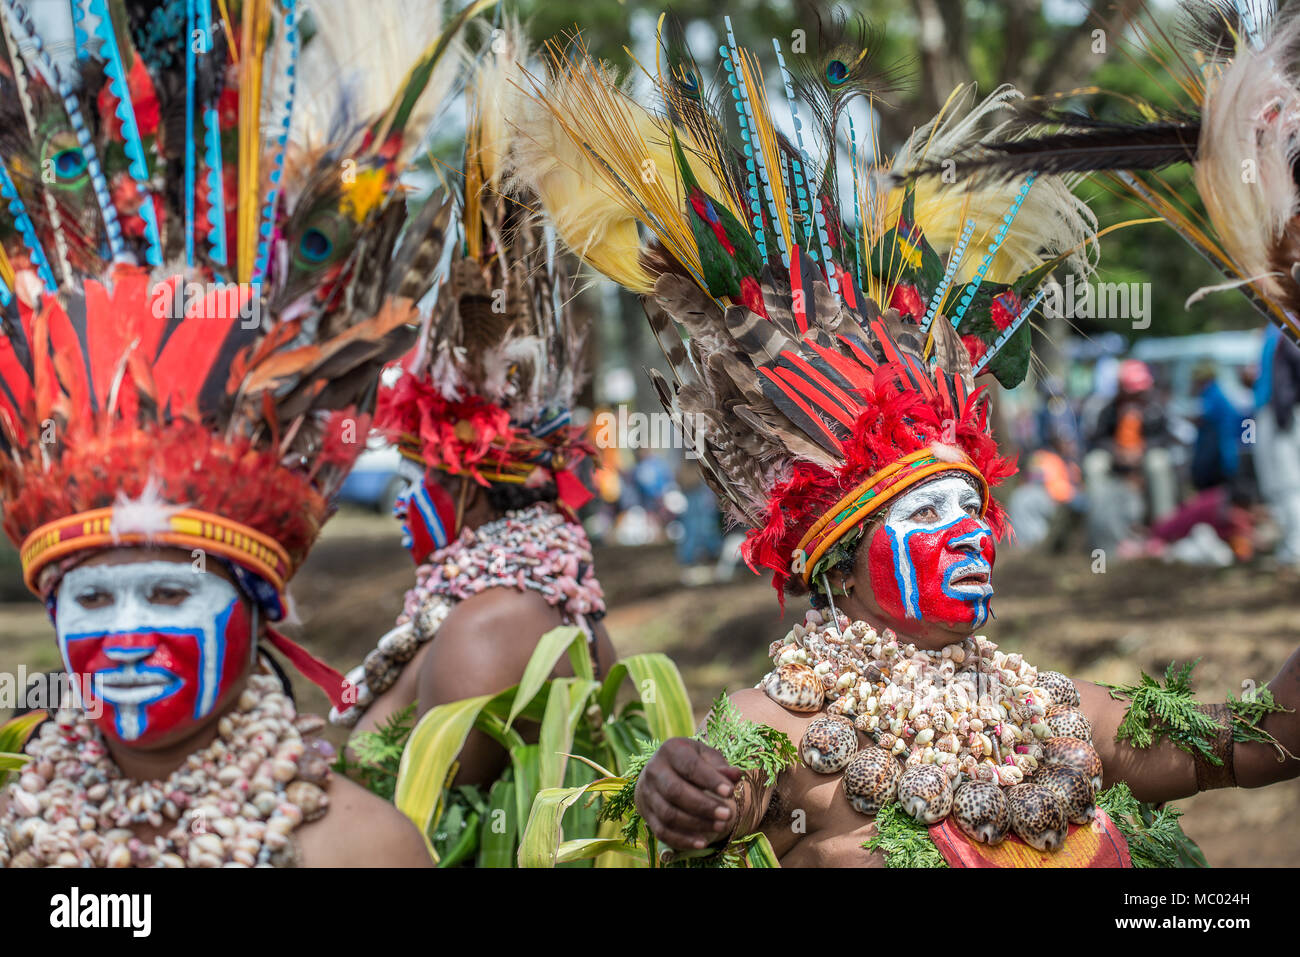 Three women with impressive feathers headdress and shell necklace, Mount Hagen Cultural Show, Papua New Guinea Stock Photo